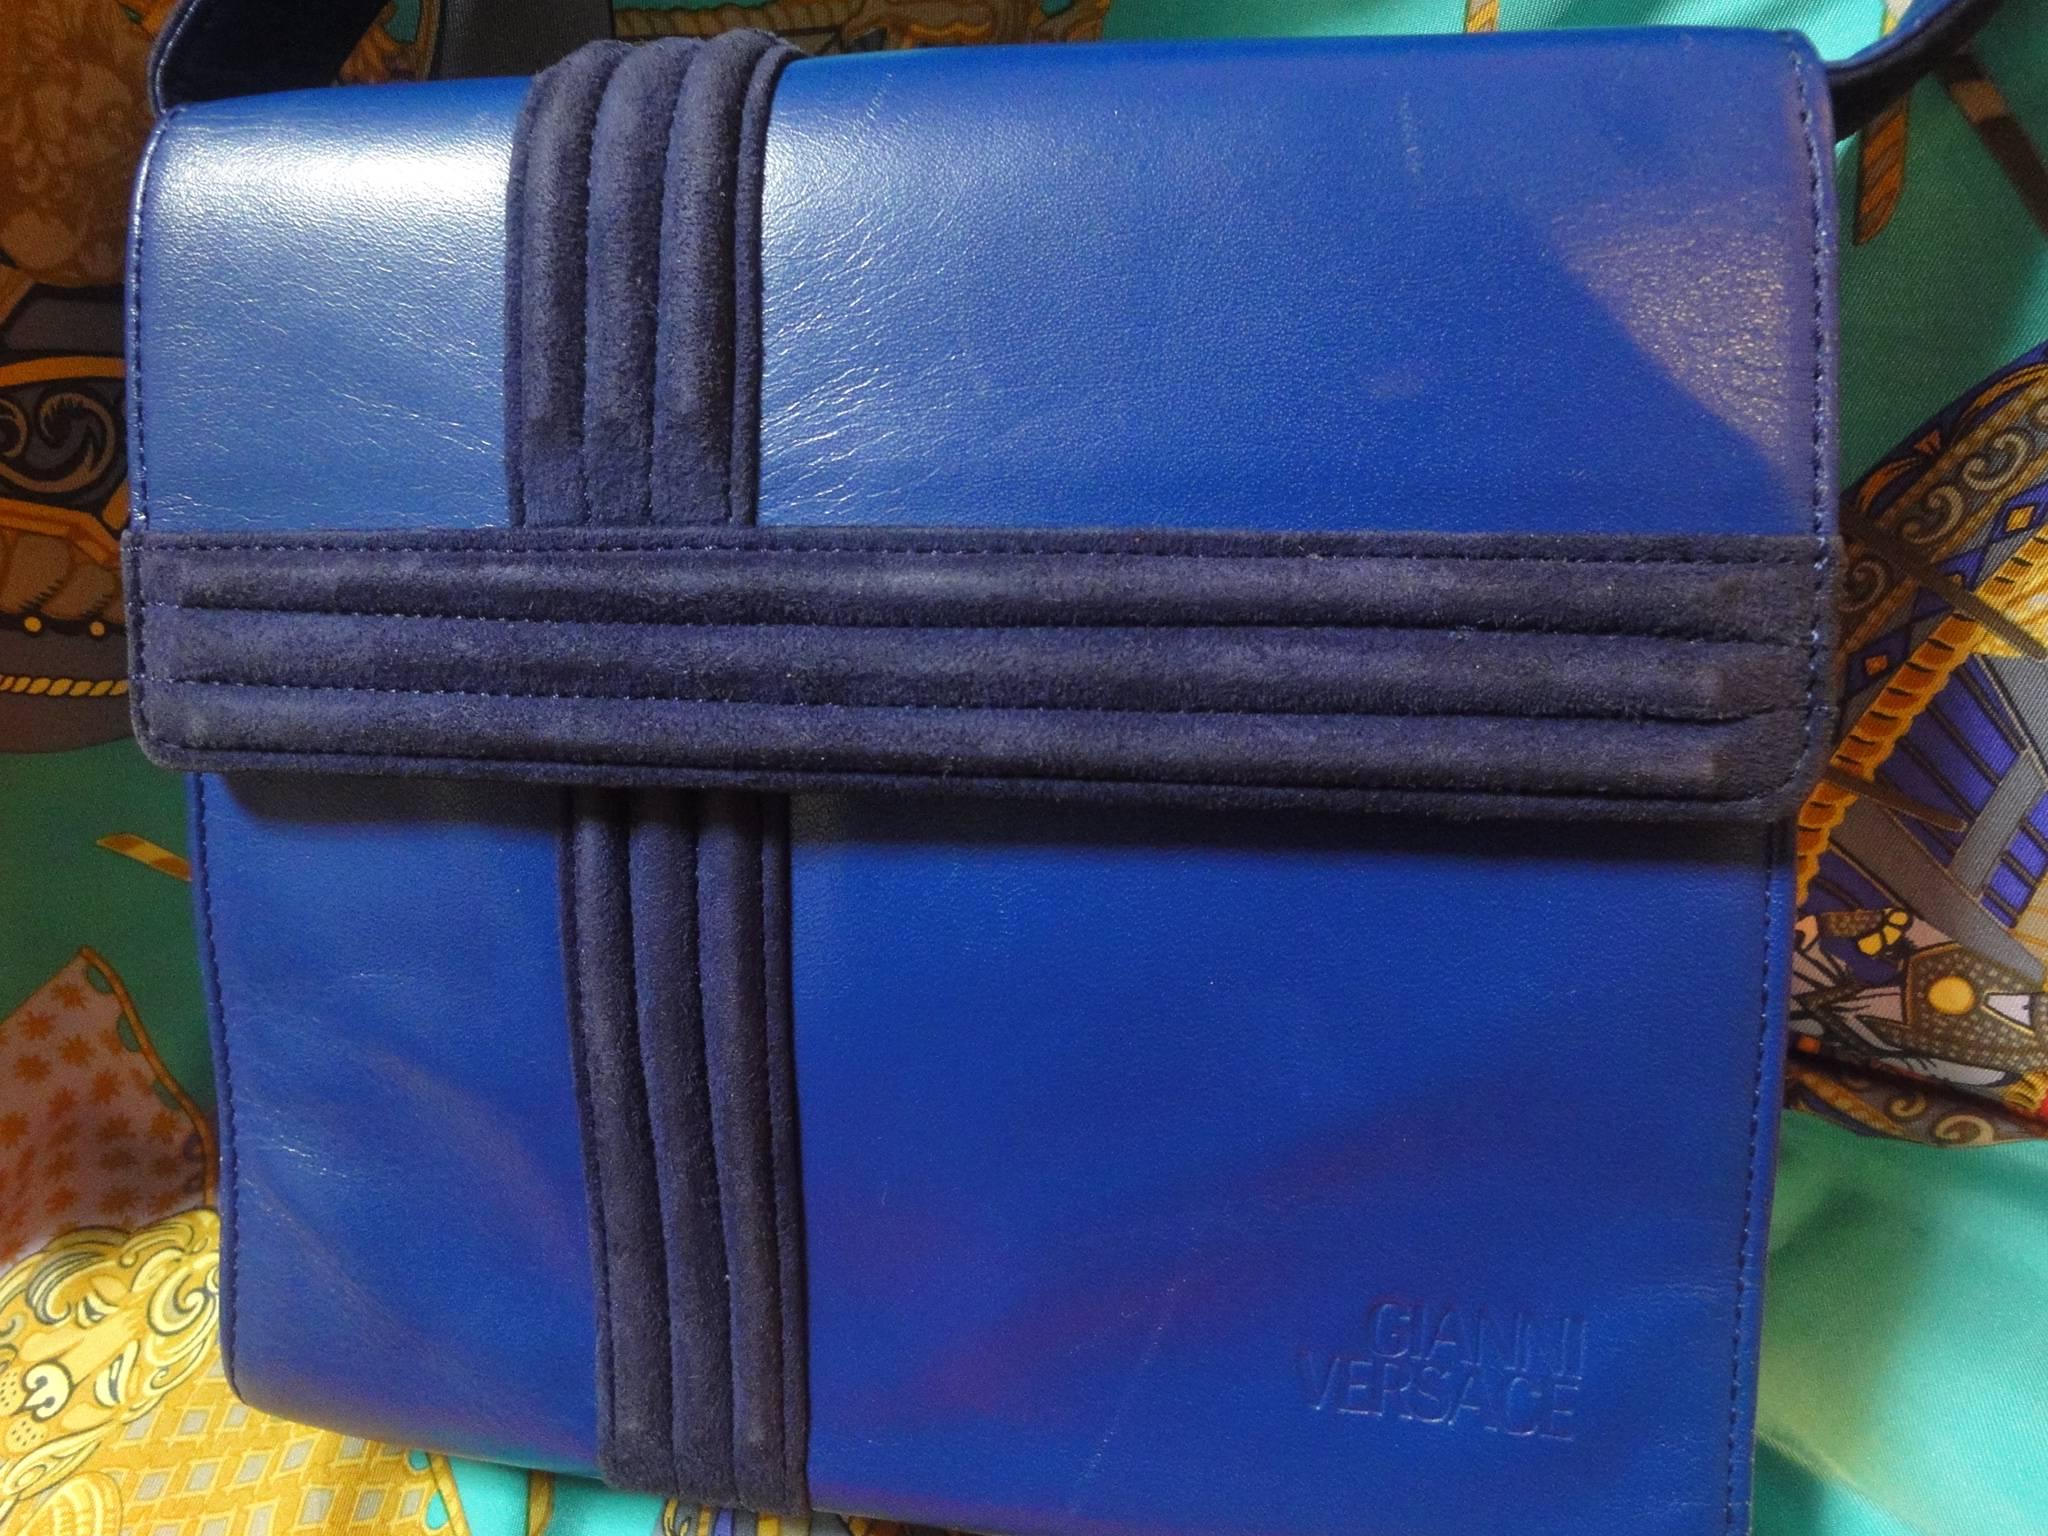 Blue Vintage Gianni Versace blue smooth and suede leather handbag purse with a bow. 